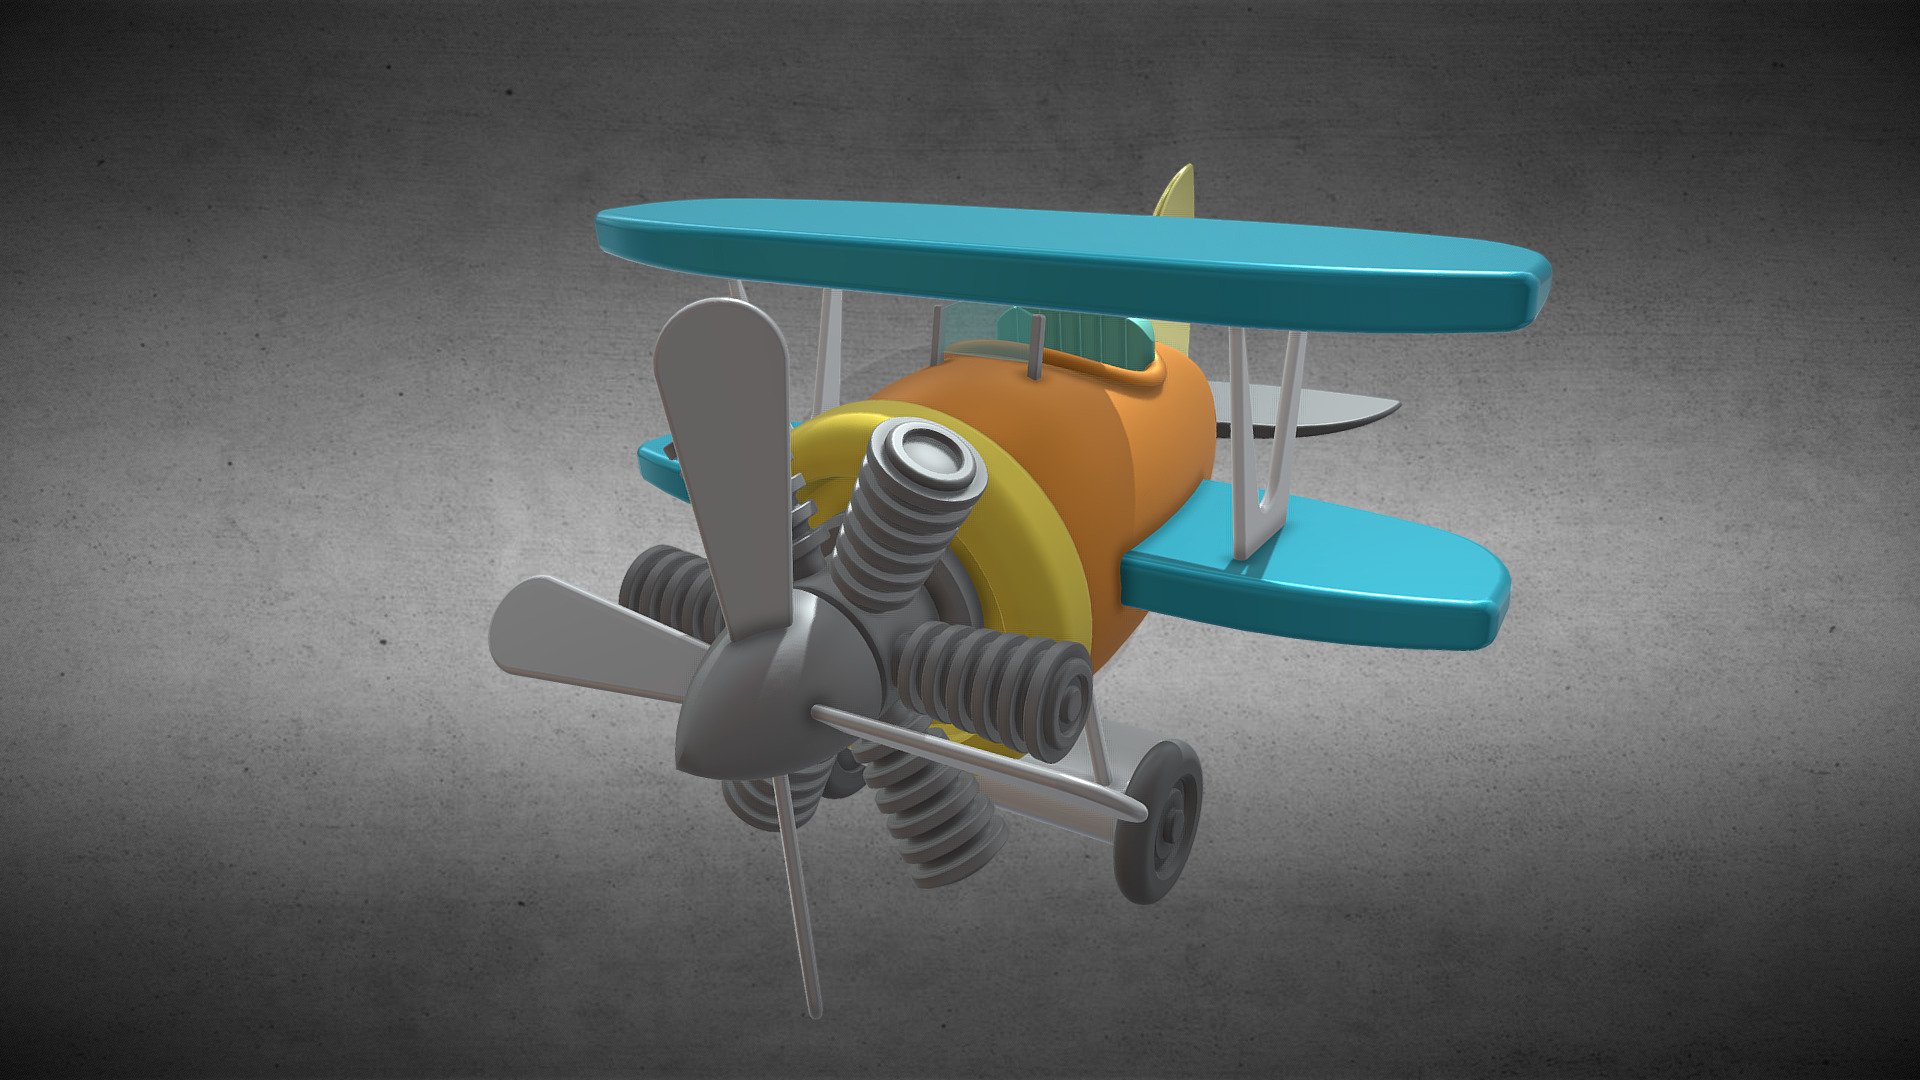 3D model Toy Plane - This is a 3D model of the Toy Plane. The 3D model is about a toy airplane on a grey surface.